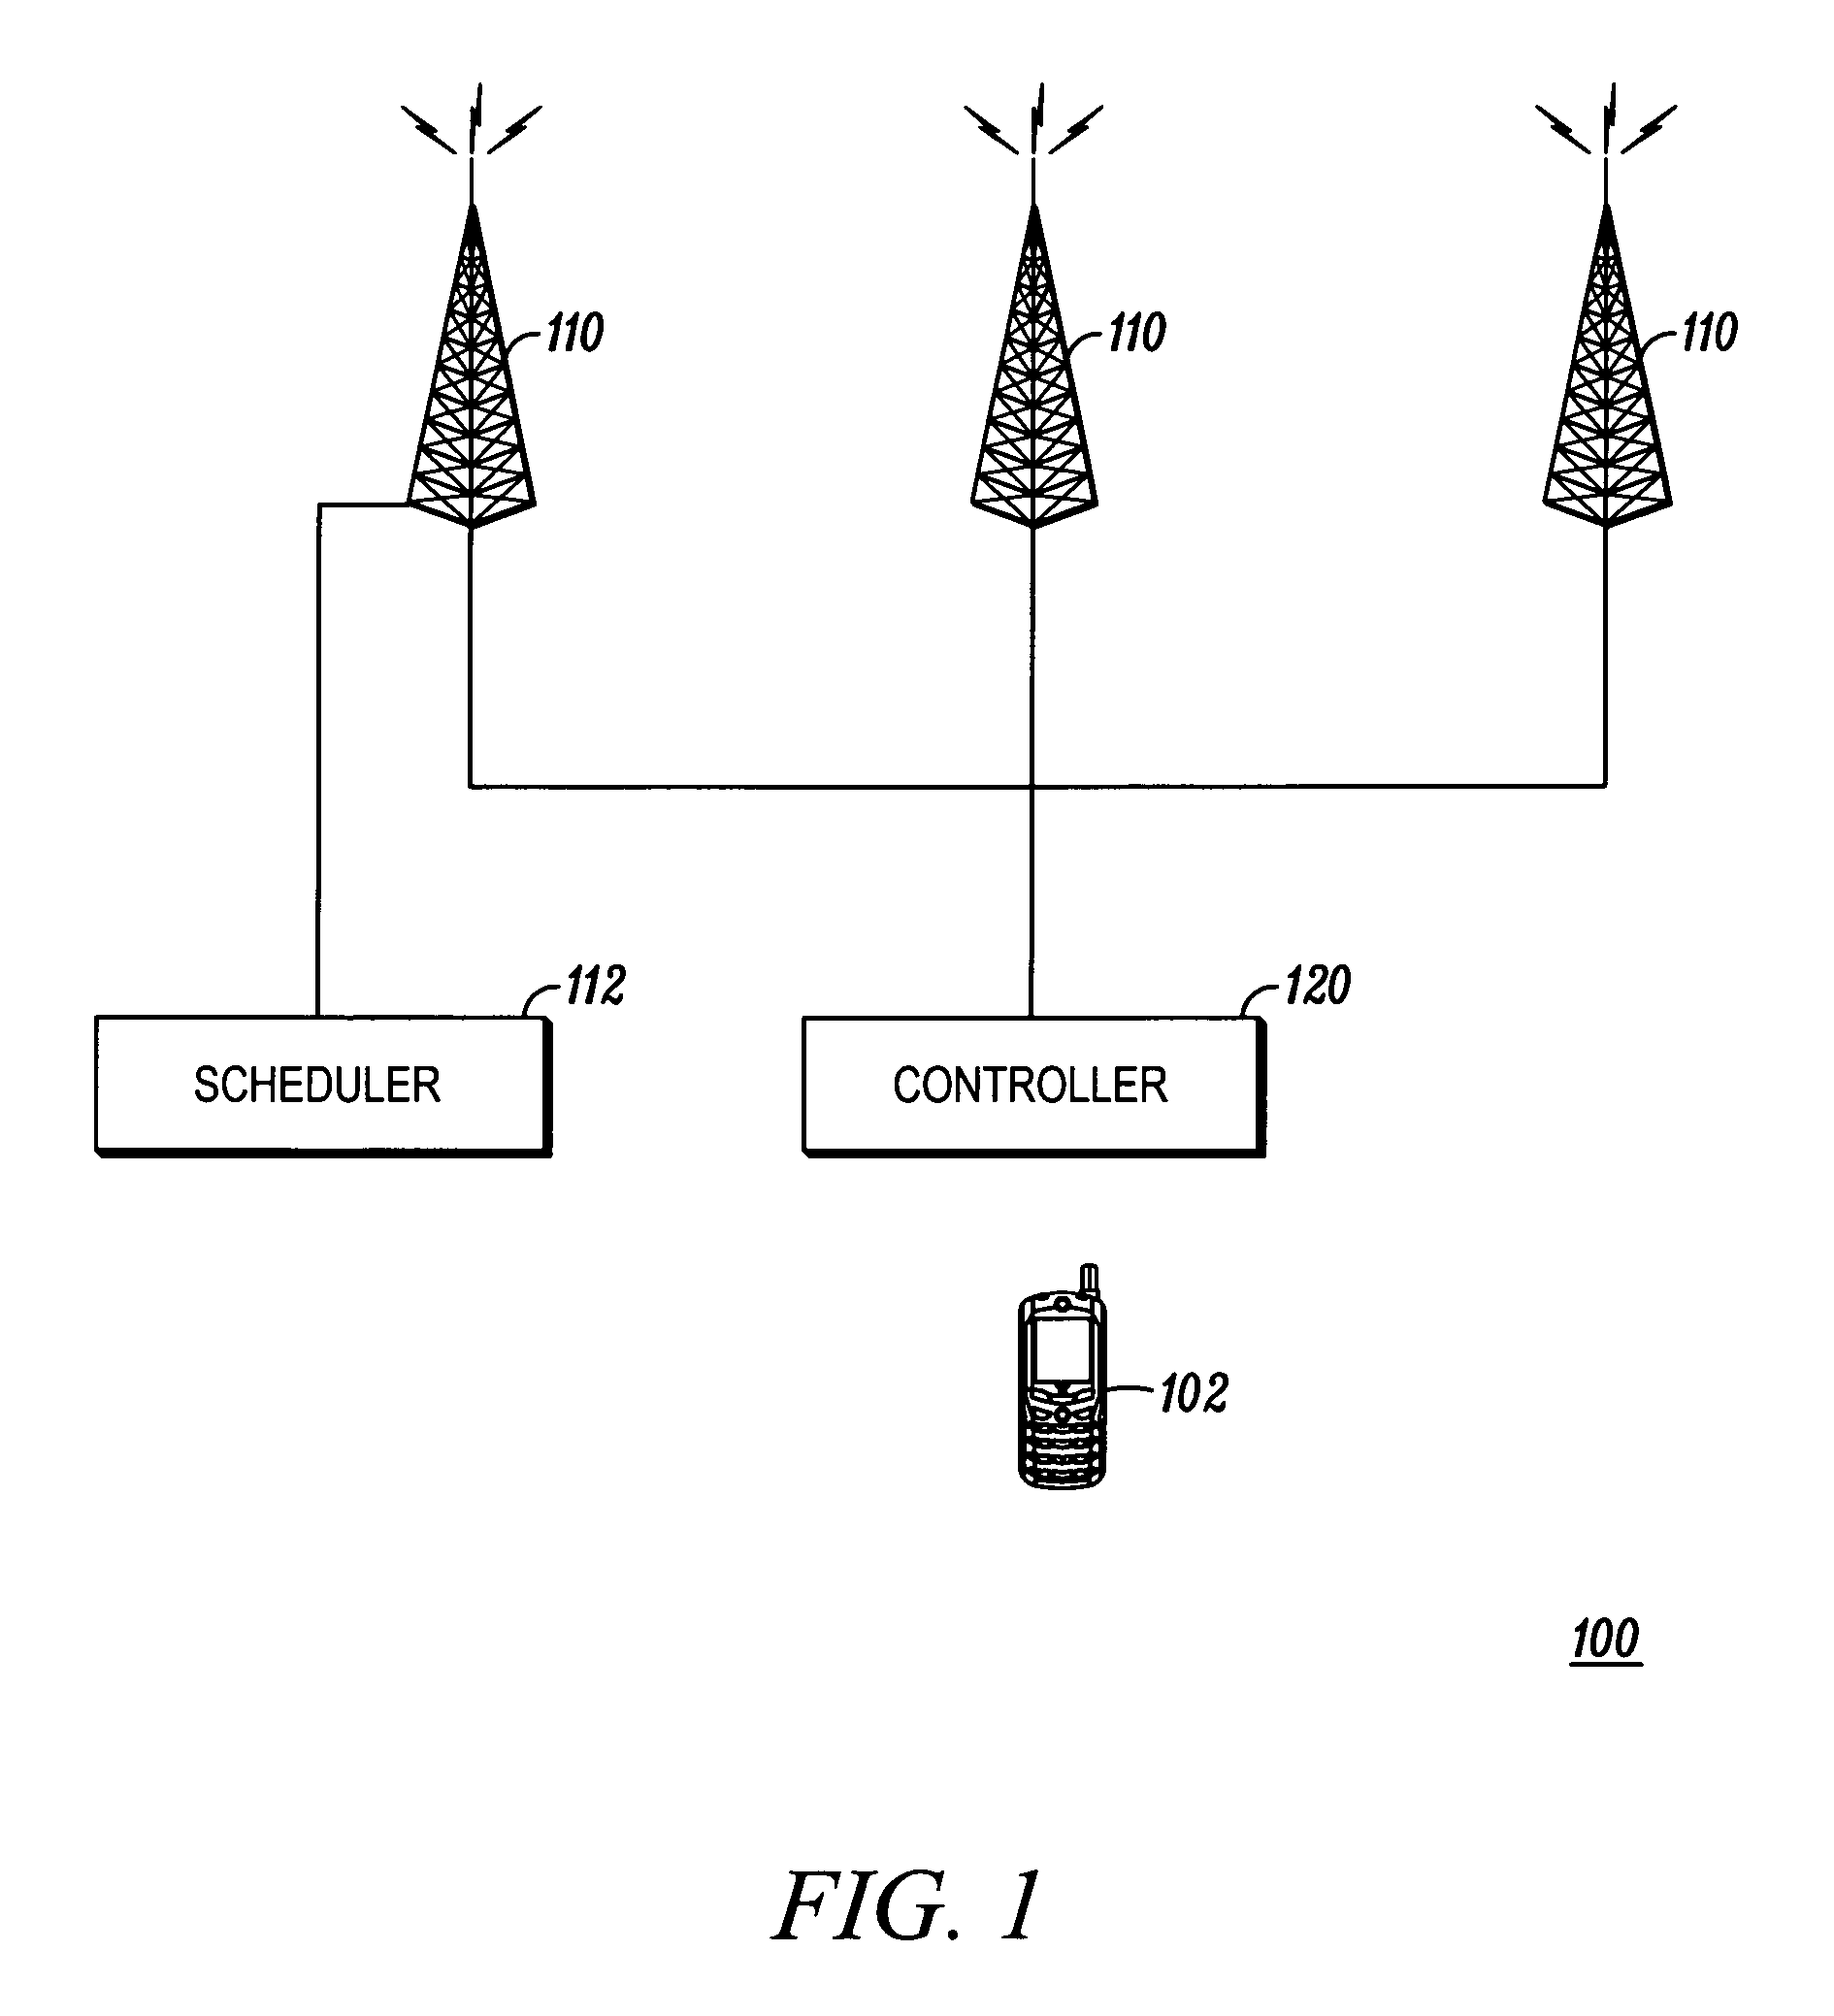 Group scheduling in wireless communication systems